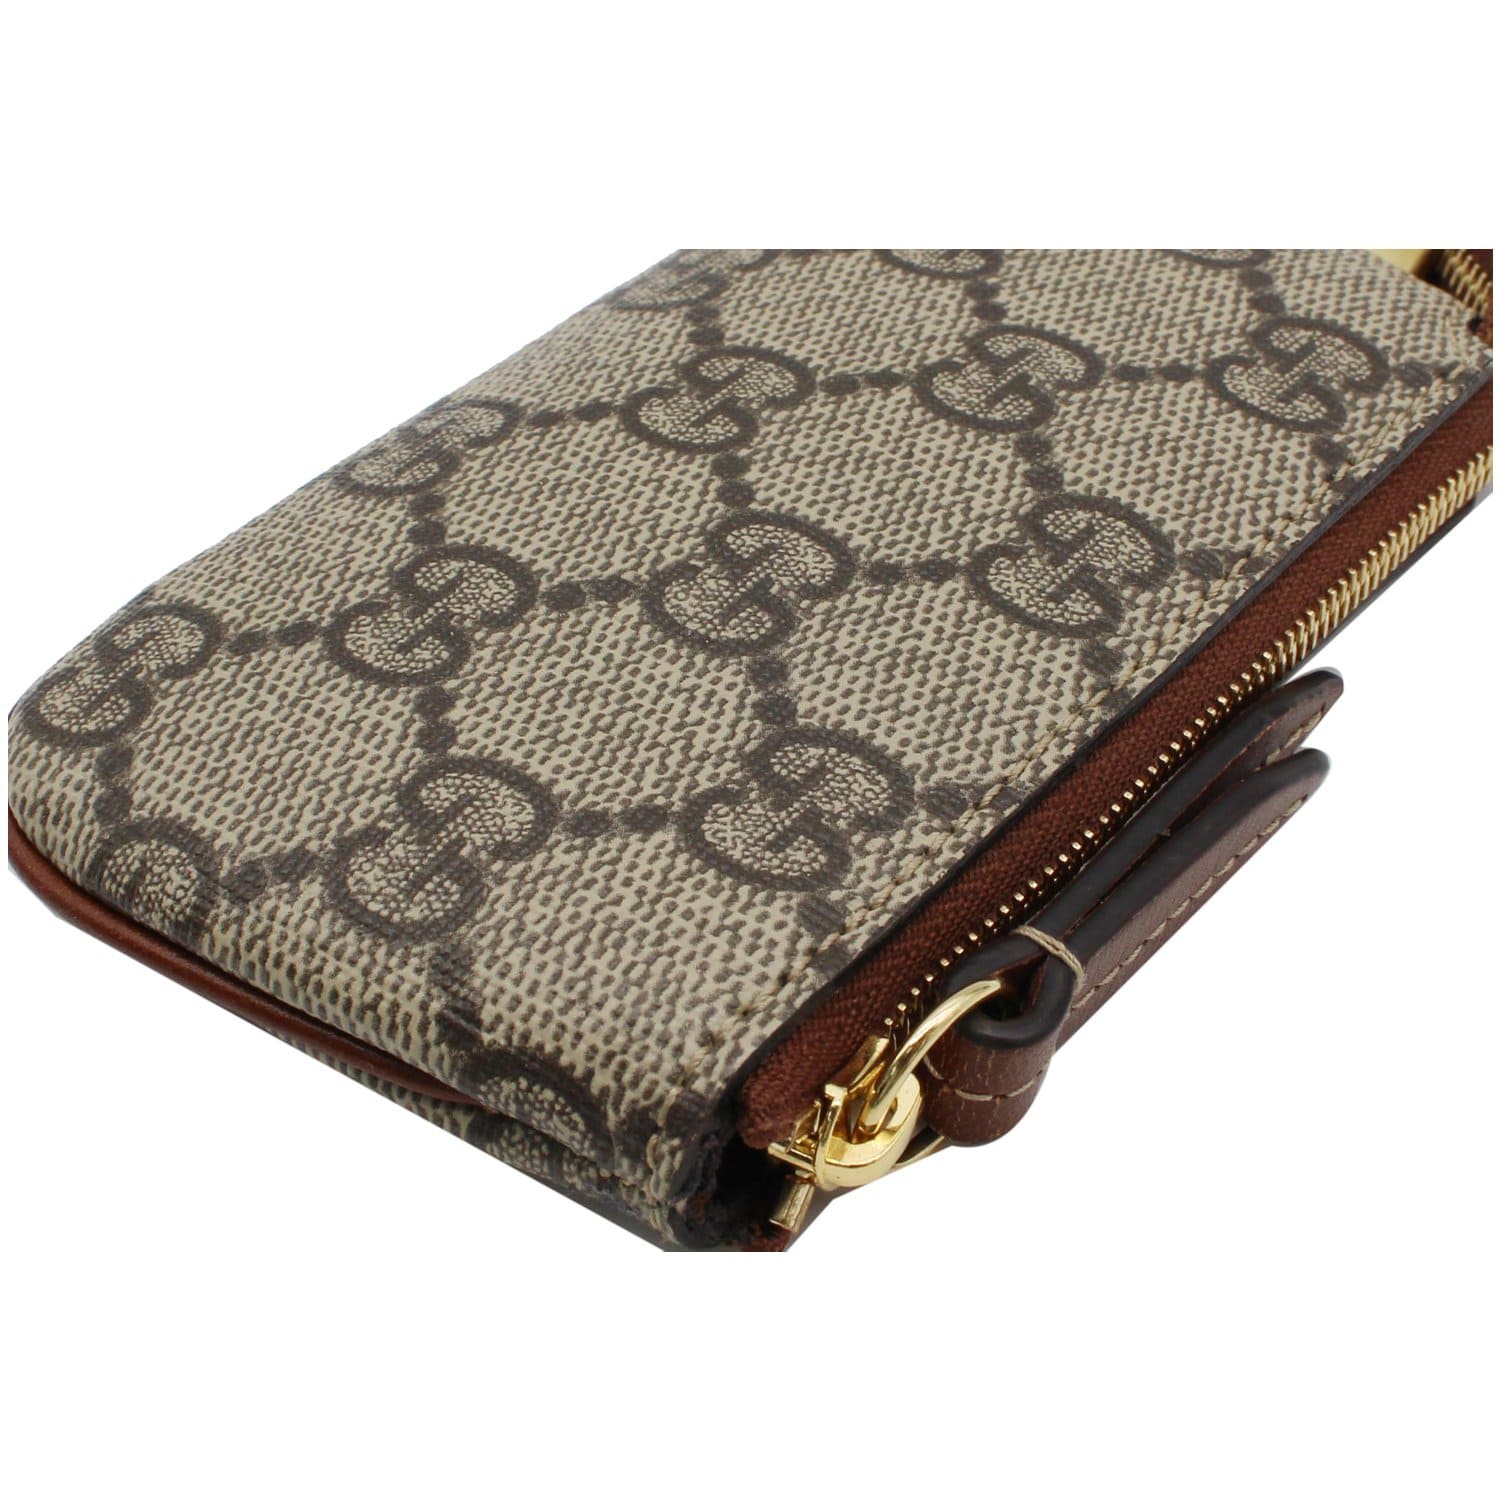 Ophidia GG key pouch in Beige Guccissima Leather